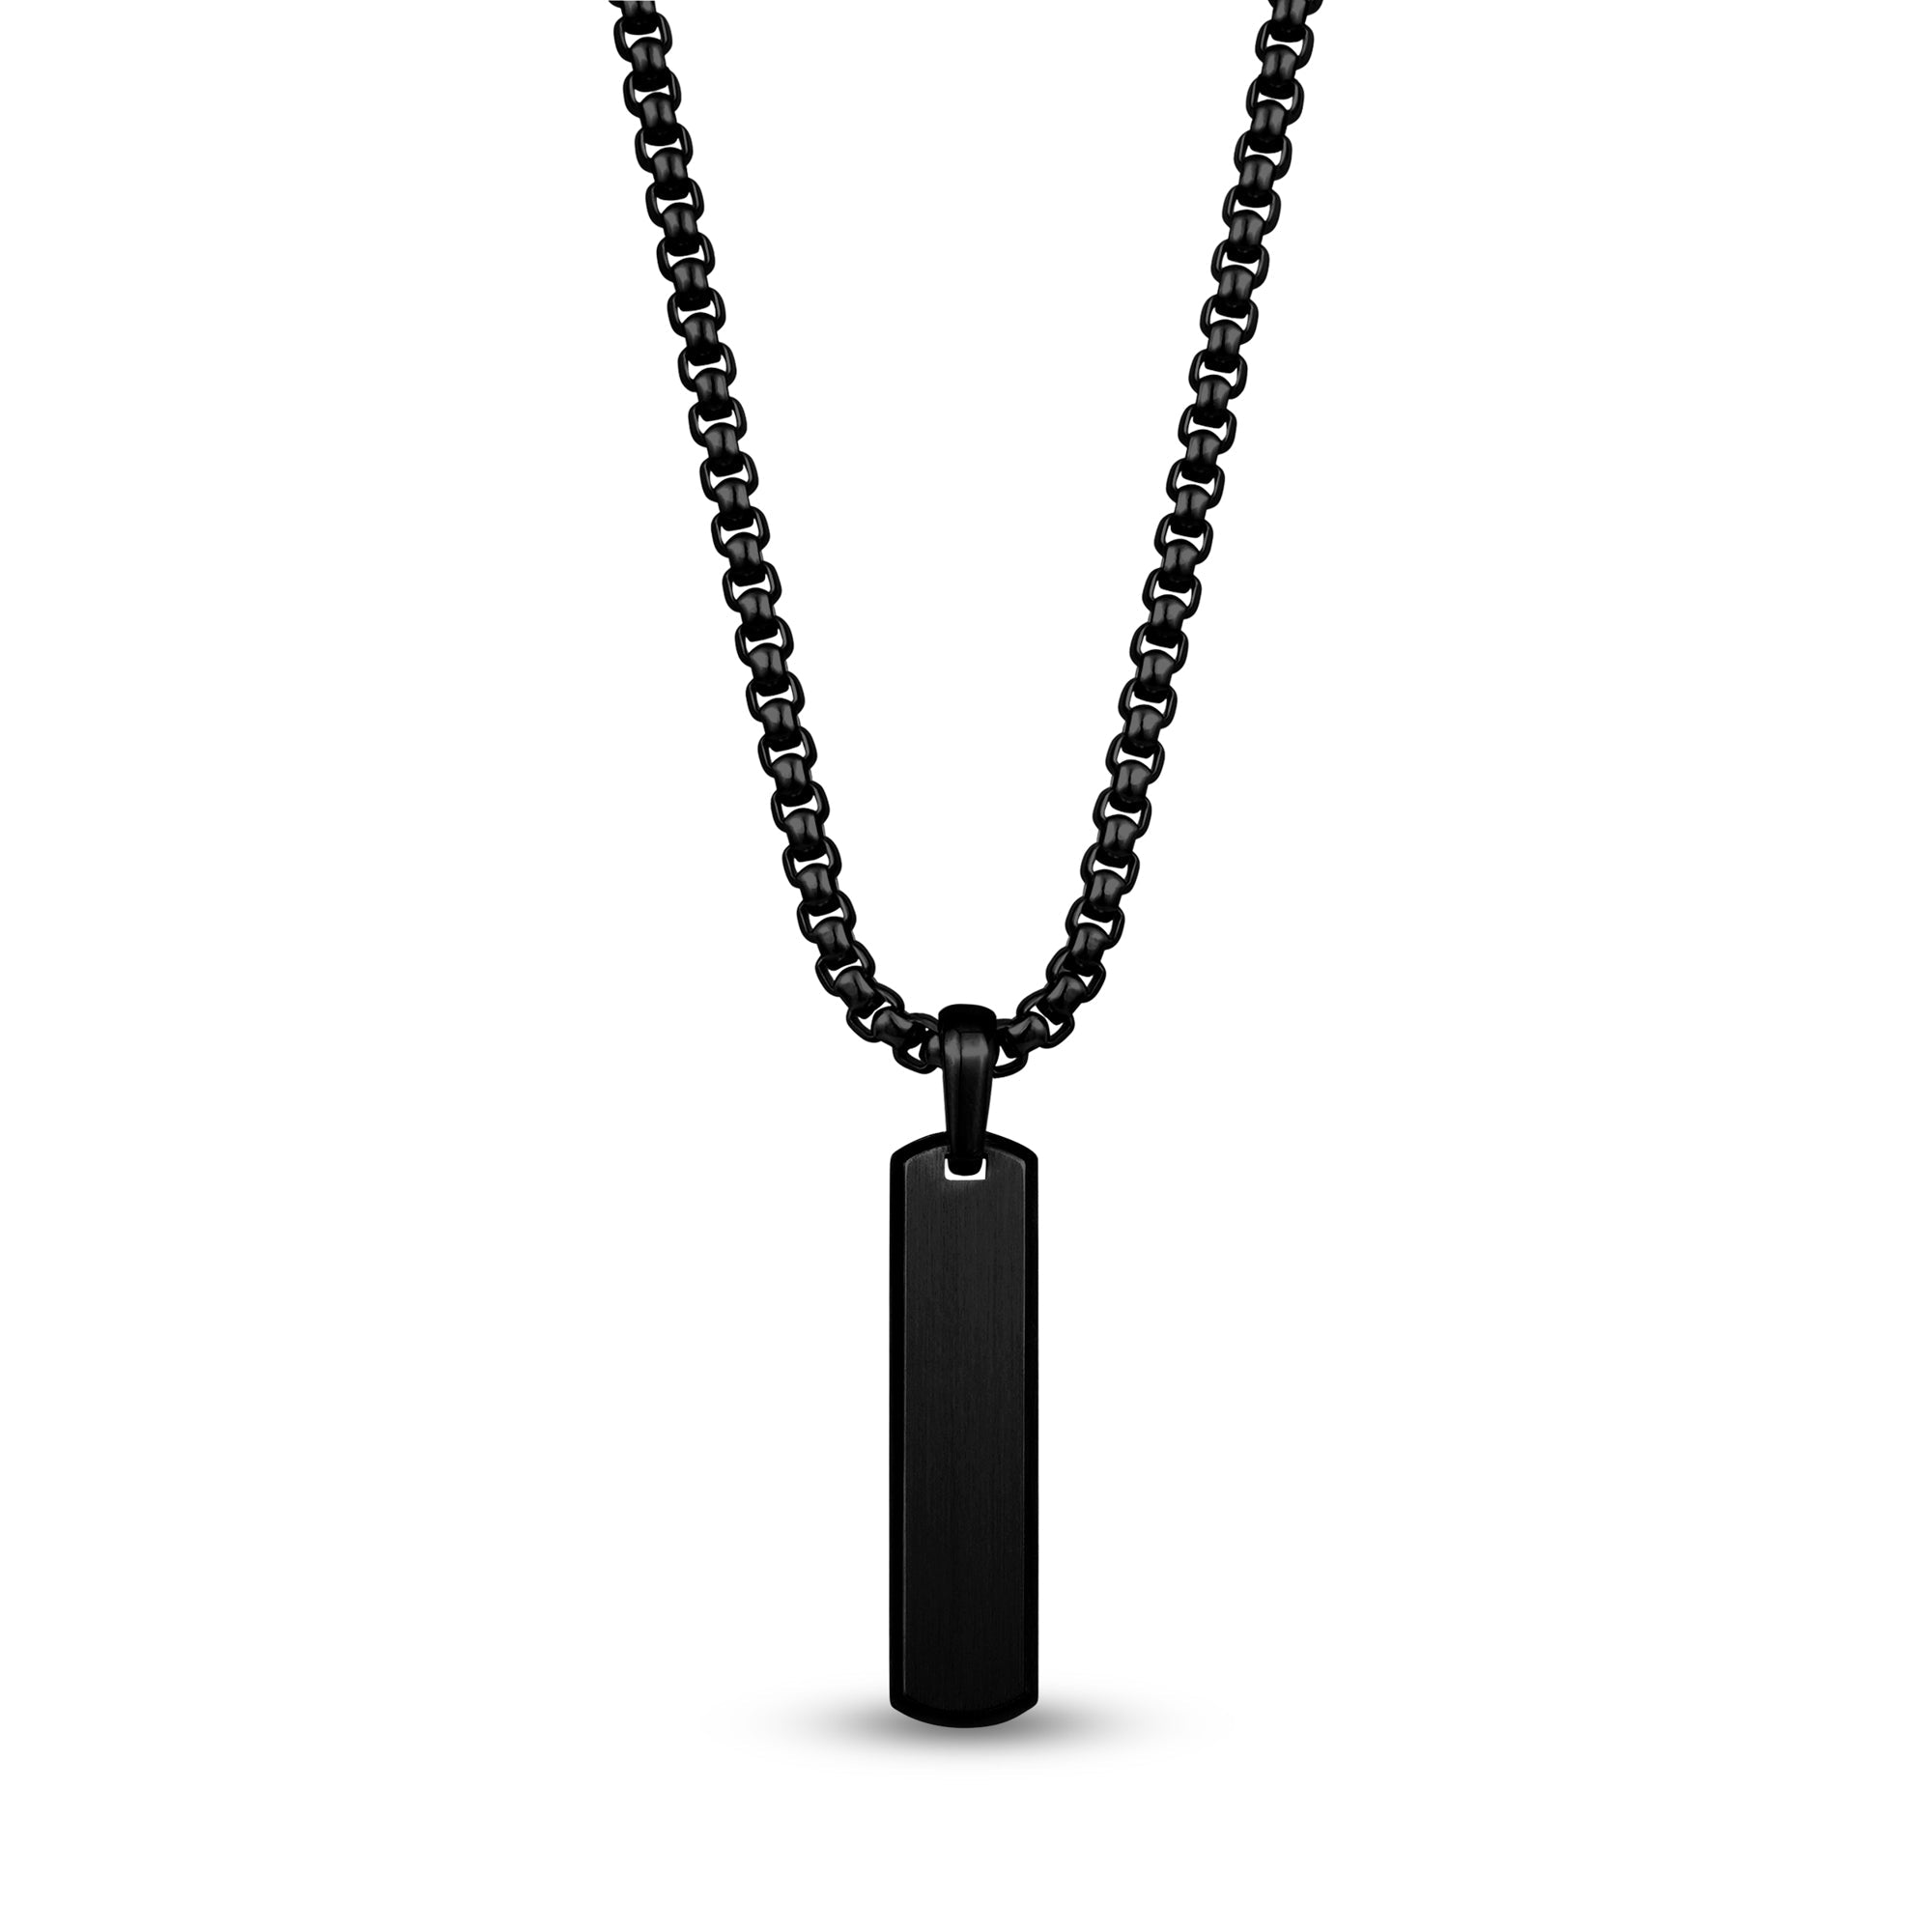 RoseGold & Black - Our Signature Minimal Bar Necklace in Silver. Shop  Necklaces → https://www.rosegoldandblack.com/collections/necklaces -  #rosegoldandblack #monochrome #fashion #luxury #lux #mensfashion  #streetstyle #hypebeast #necklace #streetwear ...